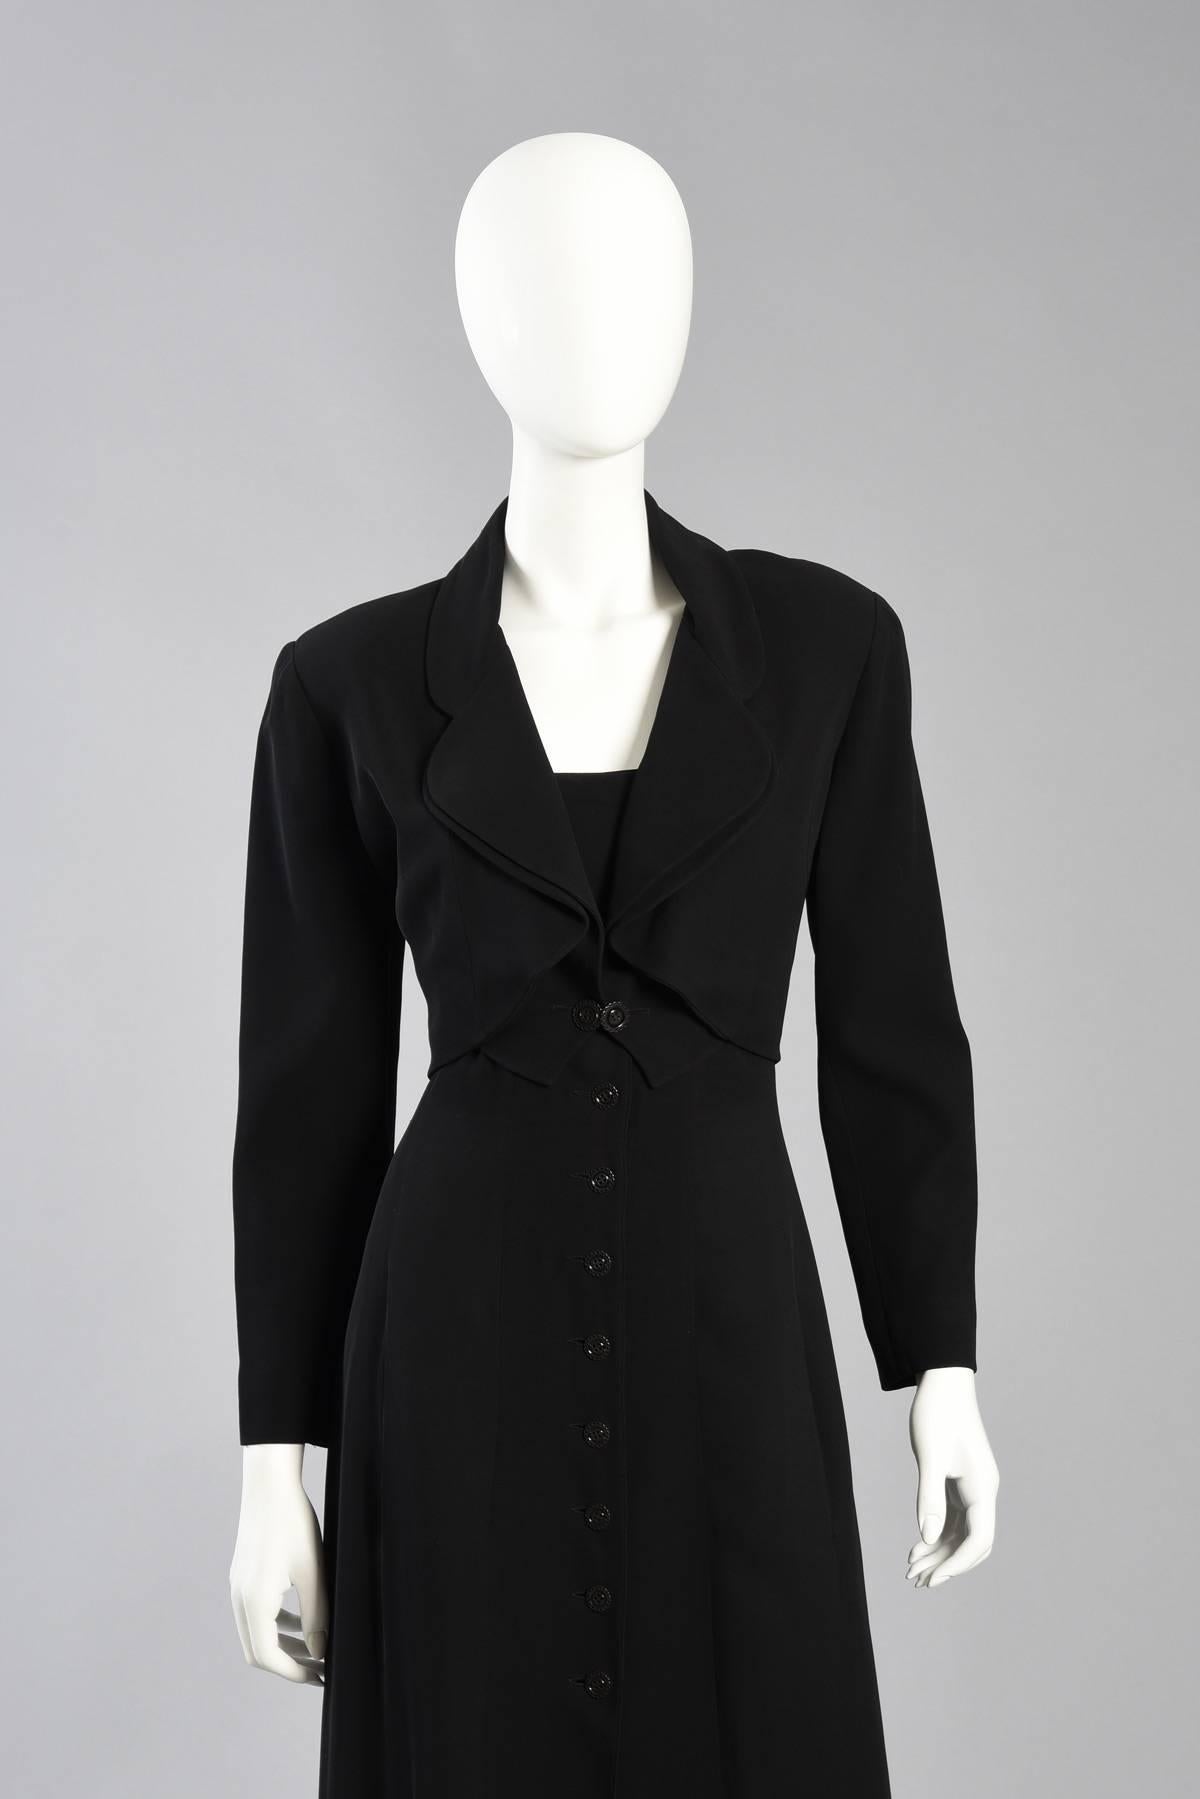 Women's Karl Lagerfeld Evening Dress with Shelf Bust For Sale